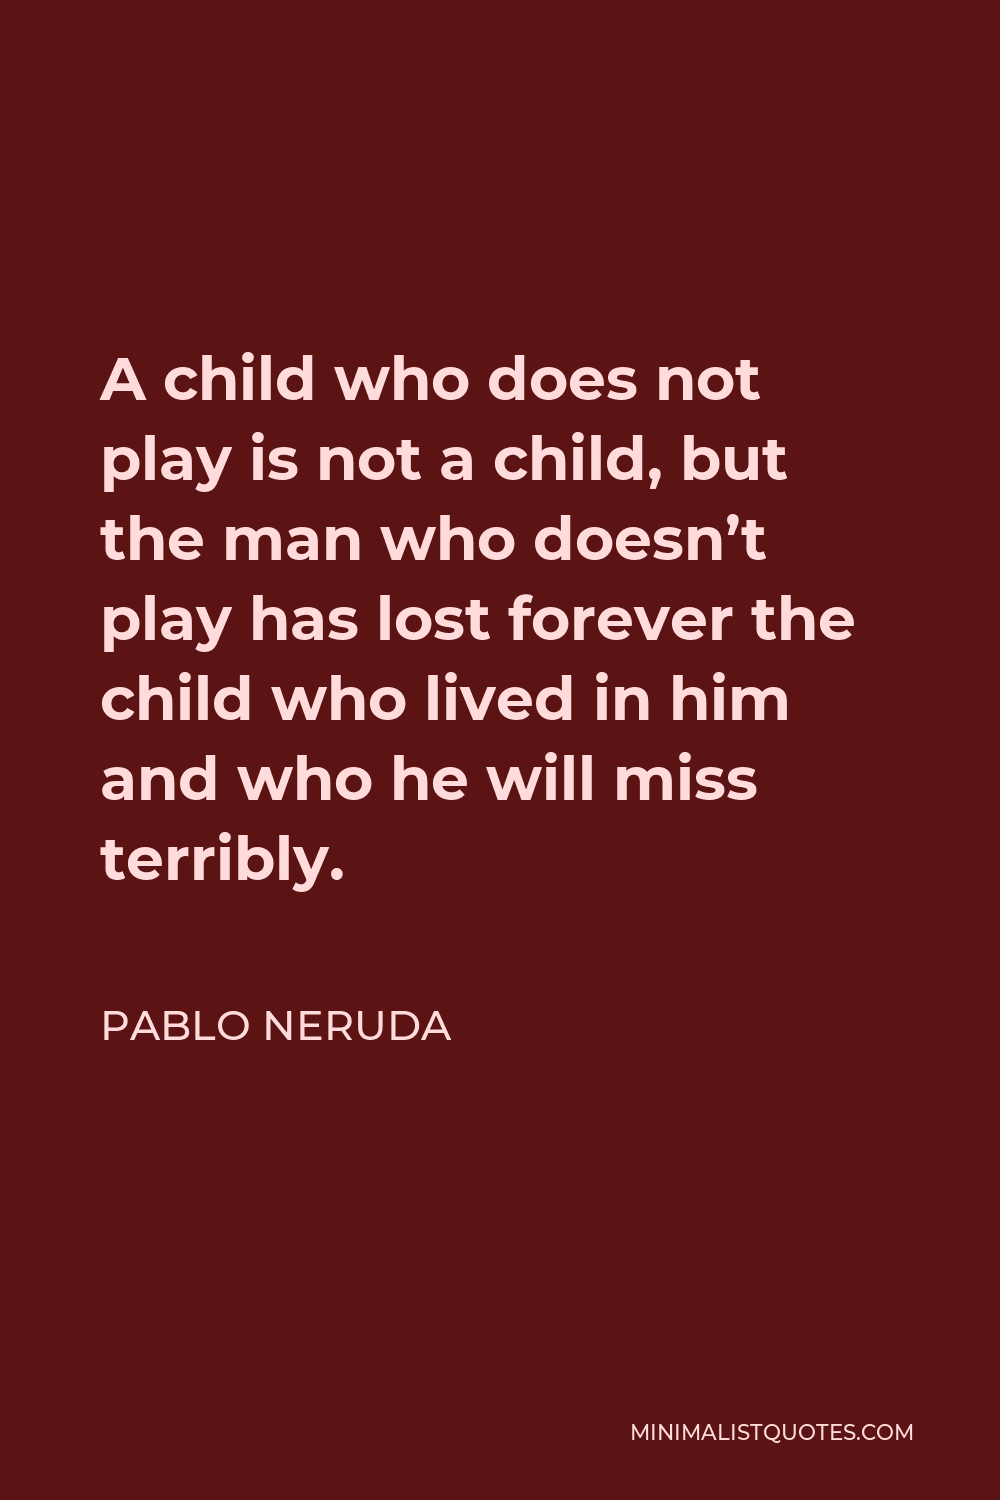 Pablo Neruda Quote - A child who does not play is not a child, but the man who doesn’t play has lost forever the child who lived in him and who he will miss terribly.